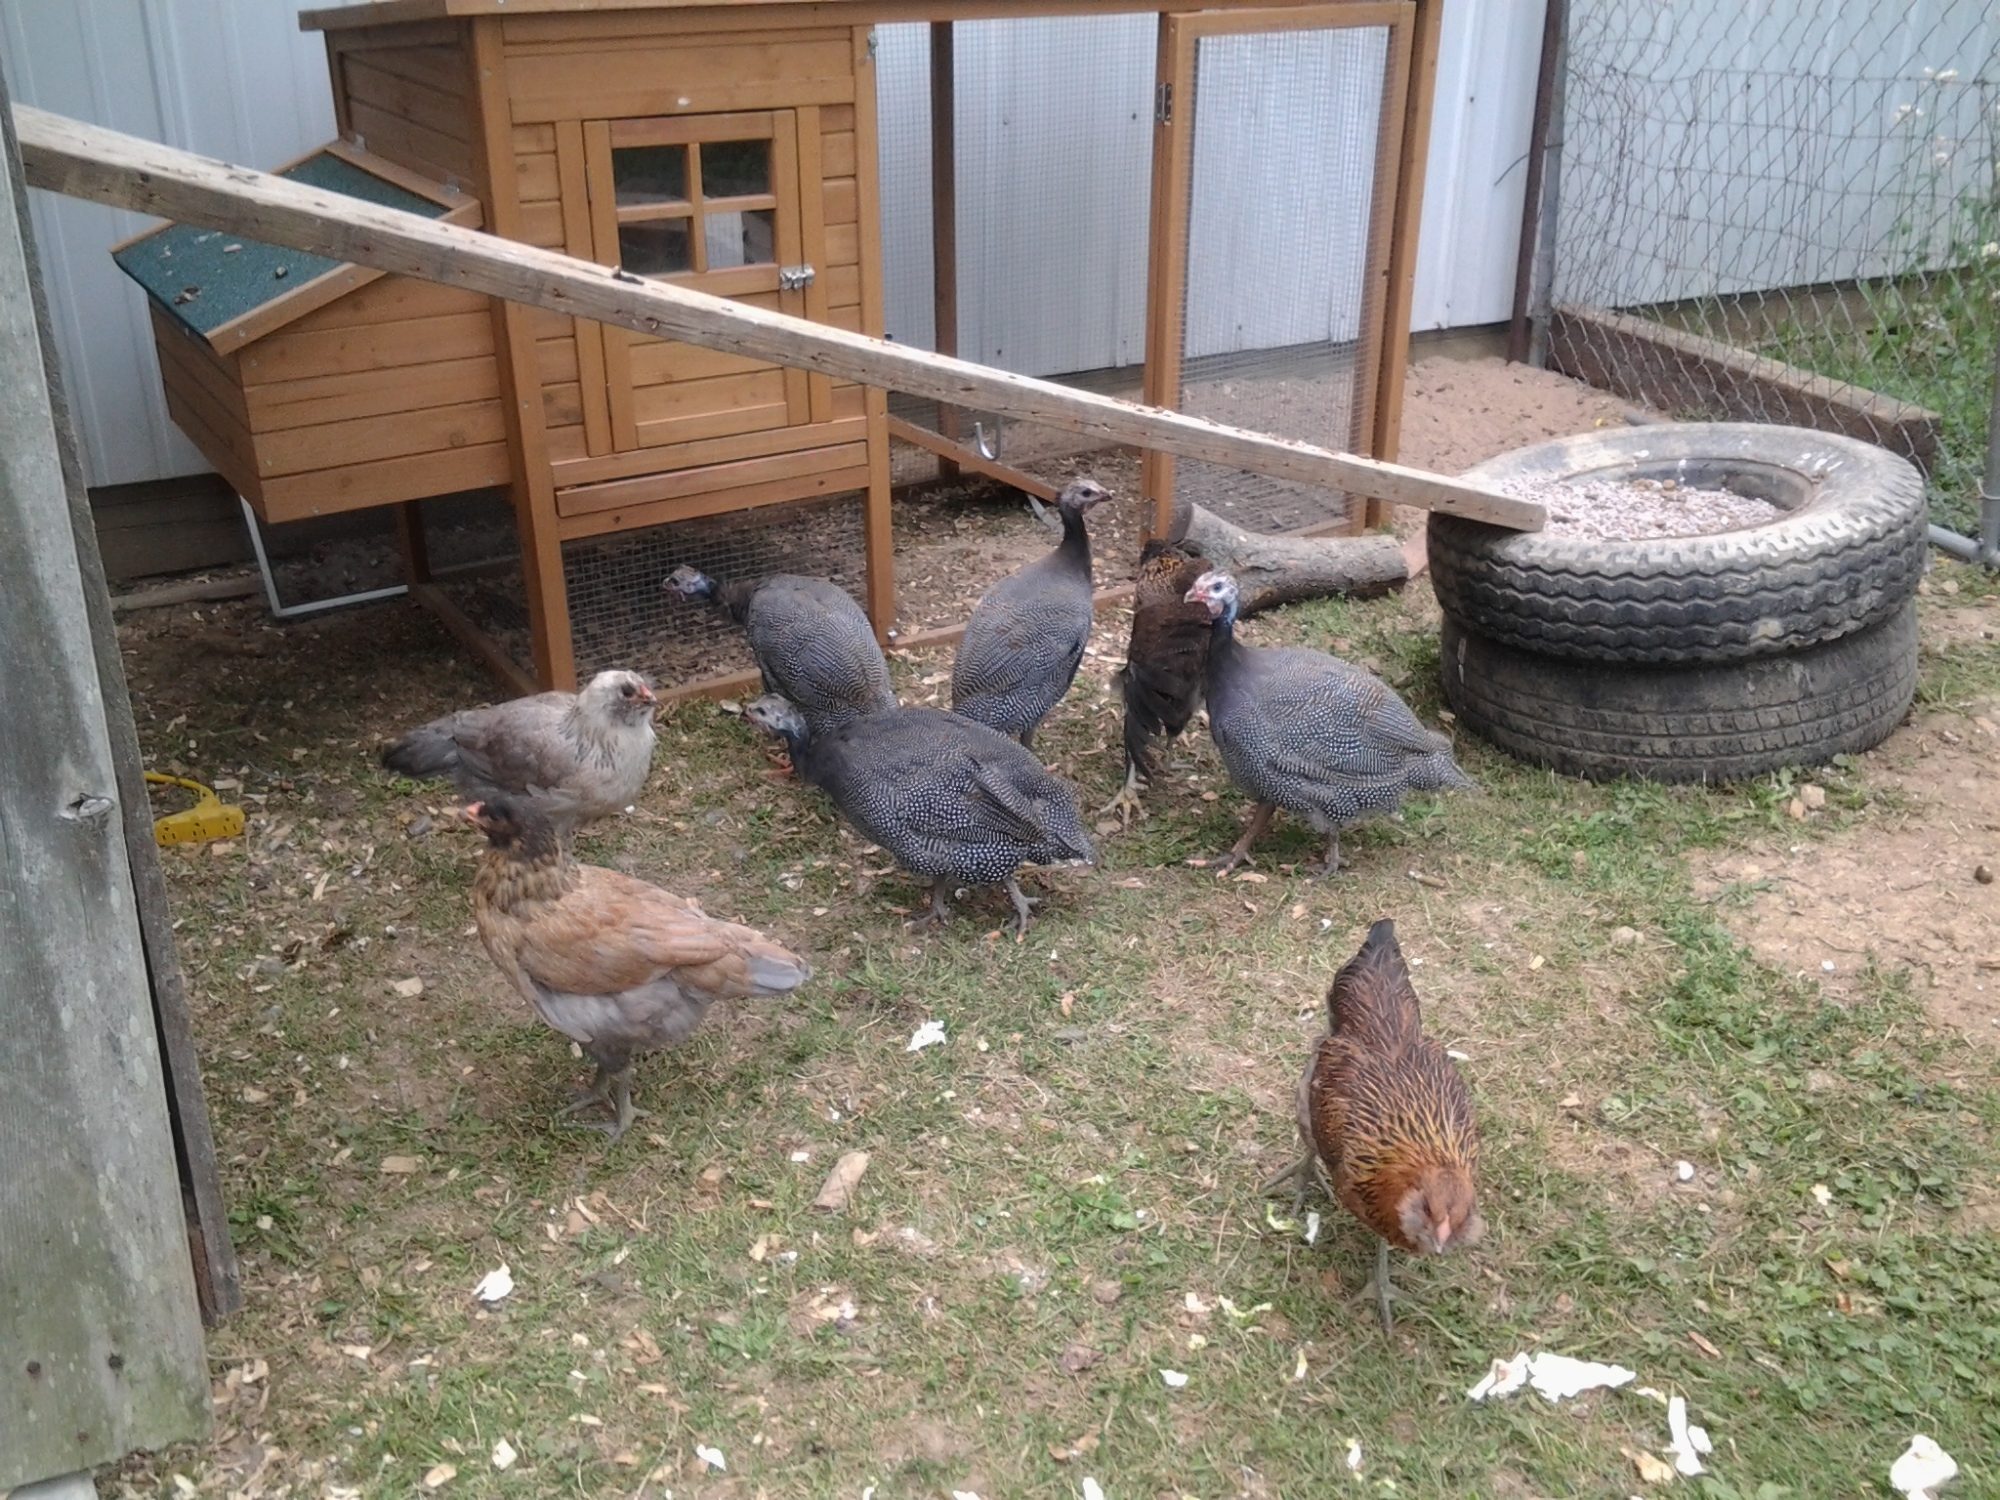 I have 4 guinea fowl and one, I know, is a female.  And, unfortunately I think the other 3 are males.  One of the 3 has medium waddles and is pretty quiet; so I don't know about that one.  I have 5 Easter Eggers named, Cee Cee (she kinda looks like a seagull, Ebony (tan with a black head), Spot (speckled neck), and Ressie and Dessie
(they look like twins except Dessie has more of a fluffy face).  I had 6 Easter Eggers, but lost one that had the split beak.  She literally starved to death.  I had 6 Barred Rocks, but I guess I picked up the wrong one at Rural King, and I found it dead the next day after I brought it home.  My other 5 were supposed to be pullets, but one turned out to be a Roo (Reggie).  The older chickens are still whooping up on the Rocks, but I make sure they get their share of the food and water.